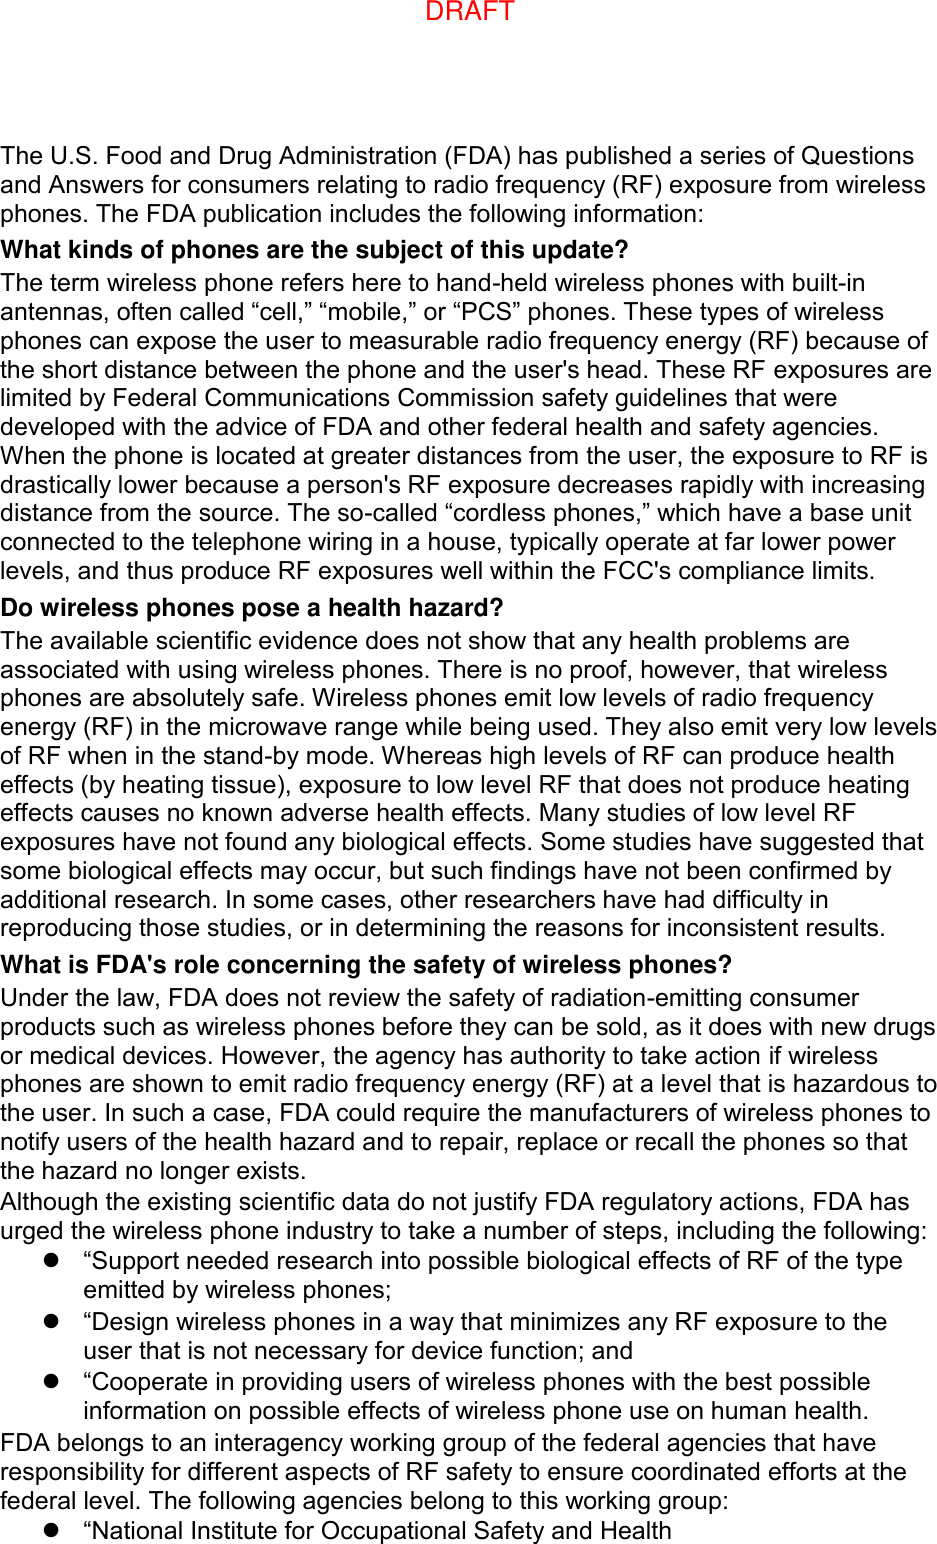 The U.S. Food and Drug Administration (FDA) has published a series of Questions and Answers for consumers relating to radio frequency (RF) exposure from wireless phones. The FDA publication includes the following information: What kinds of phones are the subject of this update? The term wireless phone refers here to hand-held wireless phones with built-in antennas, often called “cell,” “mobile,” or “PCS” phones. These types of wireless phones can expose the user to measurable radio frequency energy (RF) because of the short distance between the phone and the user&apos;s head. These RF exposures are limited by Federal Communications Commission safety guidelines that were developed with the advice of FDA and other federal health and safety agencies. When the phone is located at greater distances from the user, the exposure to RF is drastically lower because a person&apos;s RF exposure decreases rapidly with increasing distance from the source. The so-called “cordless phones,” which have a base unit connected to the telephone wiring in a house, typically operate at far lower power levels, and thus produce RF exposures well within the FCC&apos;s compliance limits. Do wireless phones pose a health hazard? The available scientific evidence does not show that any health problems are associated with using wireless phones. There is no proof, however, that wireless phones are absolutely safe. Wireless phones emit low levels of radio frequency energy (RF) in the microwave range while being used. They also emit very low levels of RF when in the stand-by mode. Whereas high levels of RF can produce health effects (by heating tissue), exposure to low level RF that does not produce heating effects causes no known adverse health effects. Many studies of low level RF exposures have not found any biological effects. Some studies have suggested that some biological effects may occur, but such findings have not been confirmed by additional research. In some cases, other researchers have had difficulty in reproducing those studies, or in determining the reasons for inconsistent results. What is FDA&apos;s role concerning the safety of wireless phones? Under the law, FDA does not review the safety of radiation-emitting consumer products such as wireless phones before they can be sold, as it does with new drugs or medical devices. However, the agency has authority to take action if wireless phones are shown to emit radio frequency energy (RF) at a level that is hazardous to the user. In such a case, FDA could require the manufacturers of wireless phones to notify users of the health hazard and to repair, replace or recall the phones so that the hazard no longer exists. Although the existing scientific data do not justify FDA regulatory actions, FDA has urged the wireless phone industry to take a number of steps, including the following:  “Support needed research into possible biological effects of RF of the type emitted by wireless phones;  “Design wireless phones in a way that minimizes any RF exposure to the user that is not necessary for device function; and  “Cooperate in providing users of wireless phones with the best possible information on possible effects of wireless phone use on human health. FDA belongs to an interagency working group of the federal agencies that have responsibility for different aspects of RF safety to ensure coordinated efforts at the federal level. The following agencies belong to this working group:  “National Institute for Occupational Safety and Health DRAFT